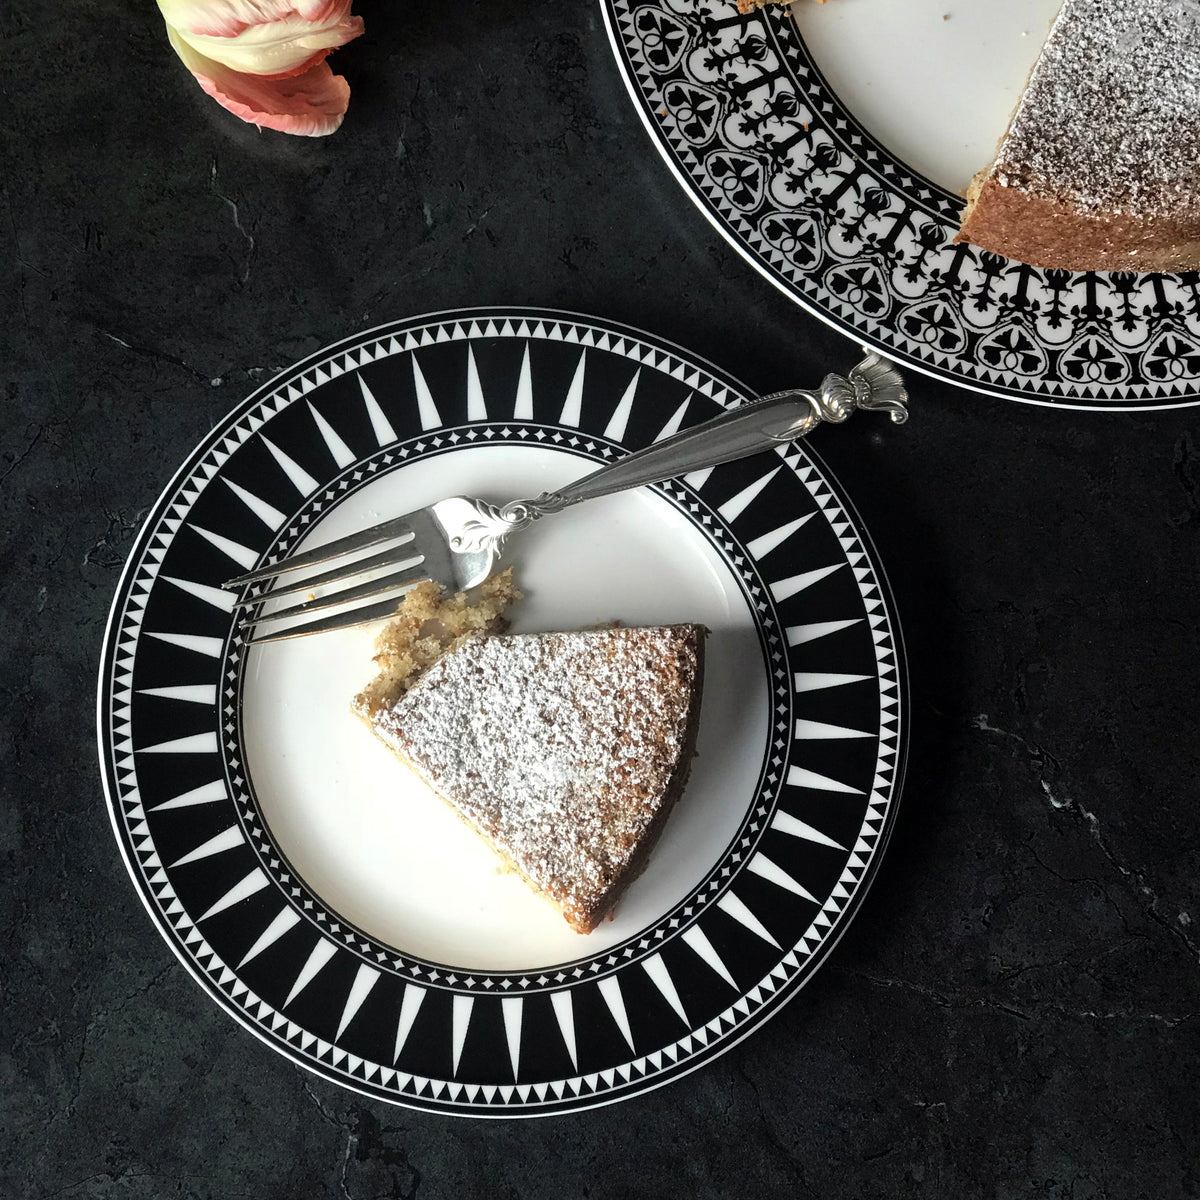 A slice of cake dusted with powdered sugar on a Marrakech Rimmed Salad Plate by Caskata Artisanal Home with a fork, beside a similar plate holding the remaining cake. A flower is partially visible in the corner.